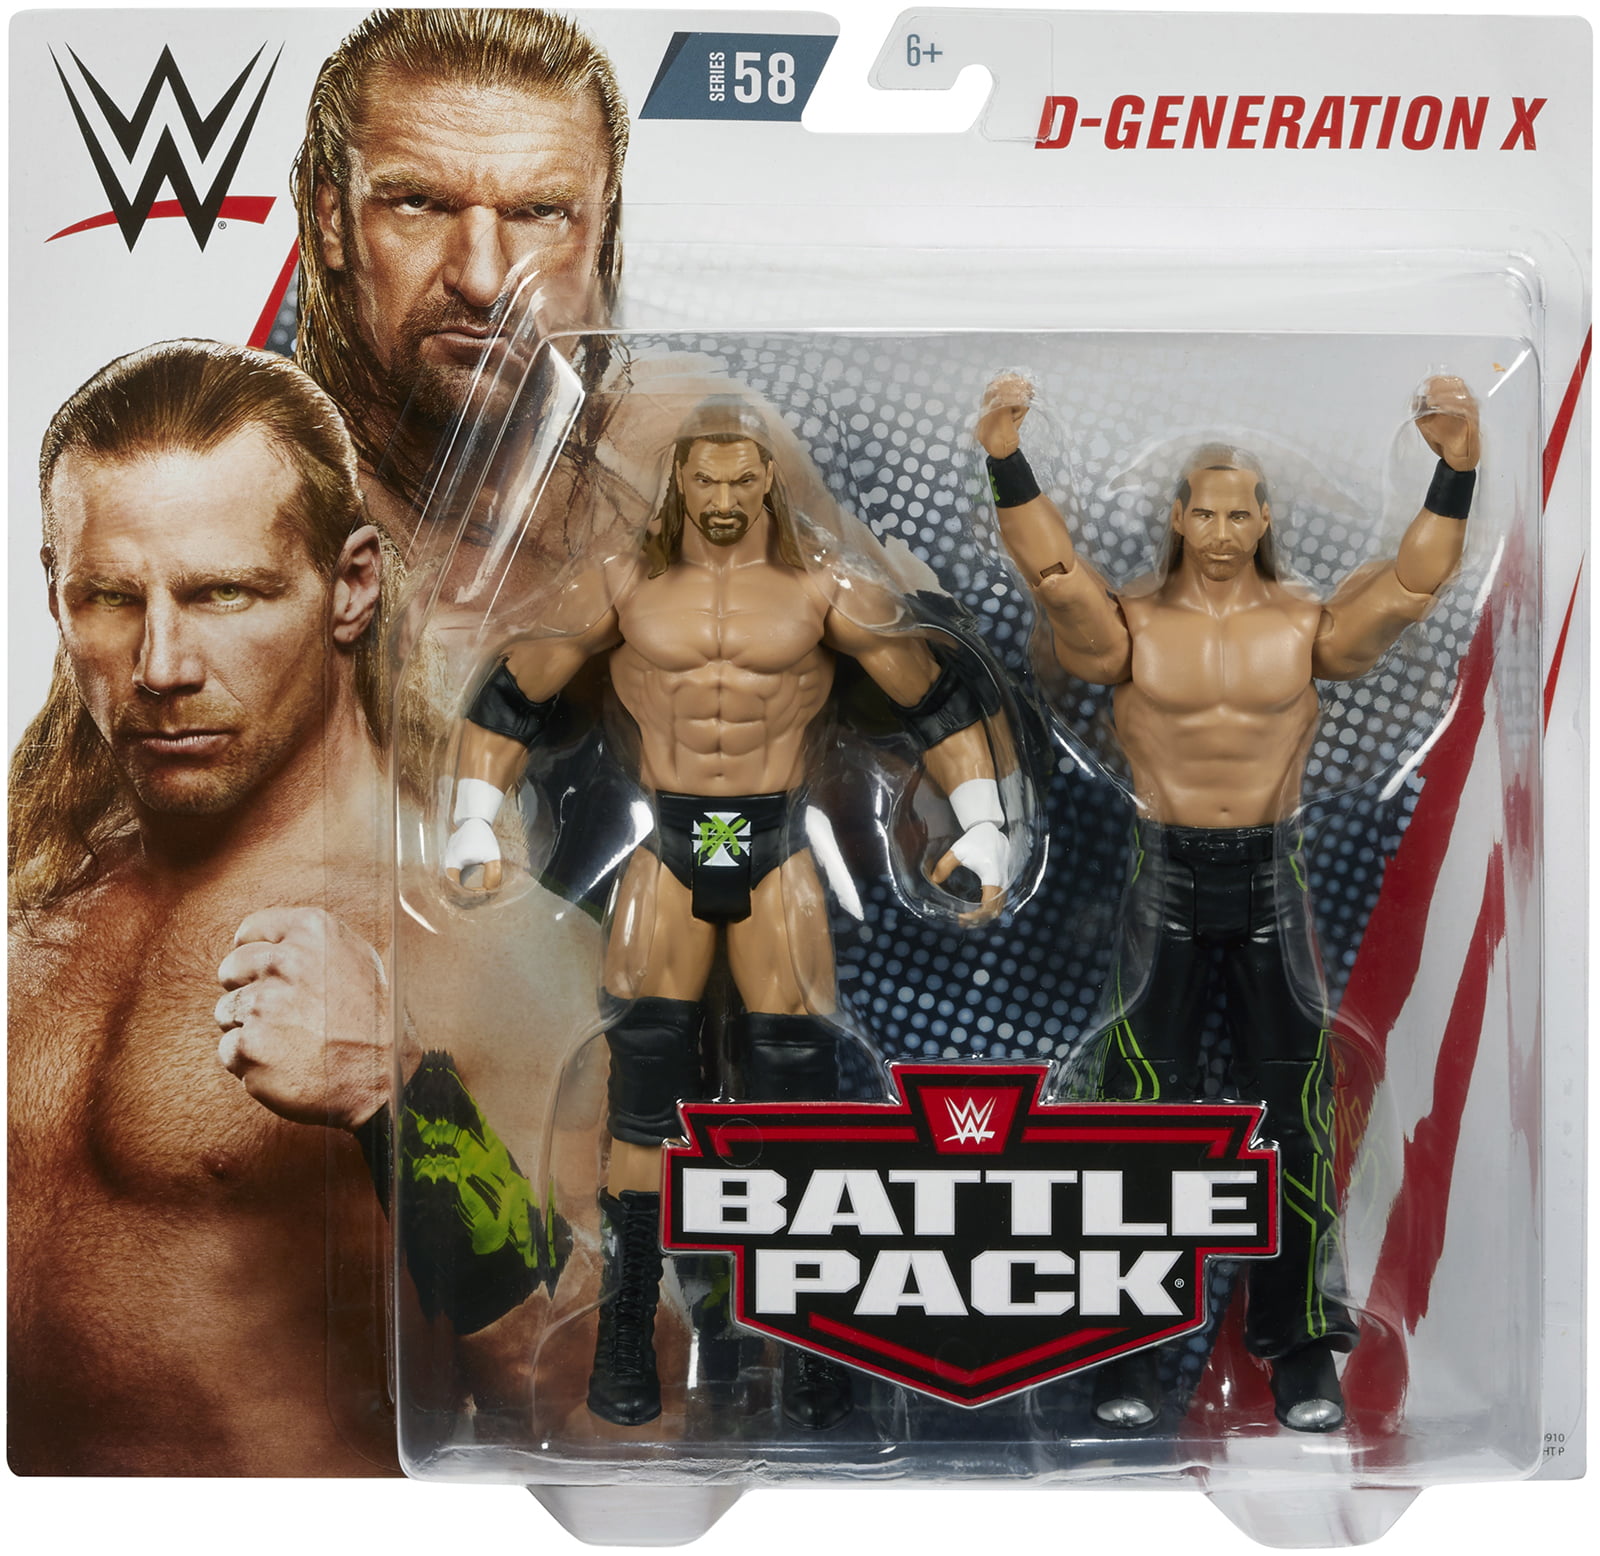 shawn michaels wwe action figure